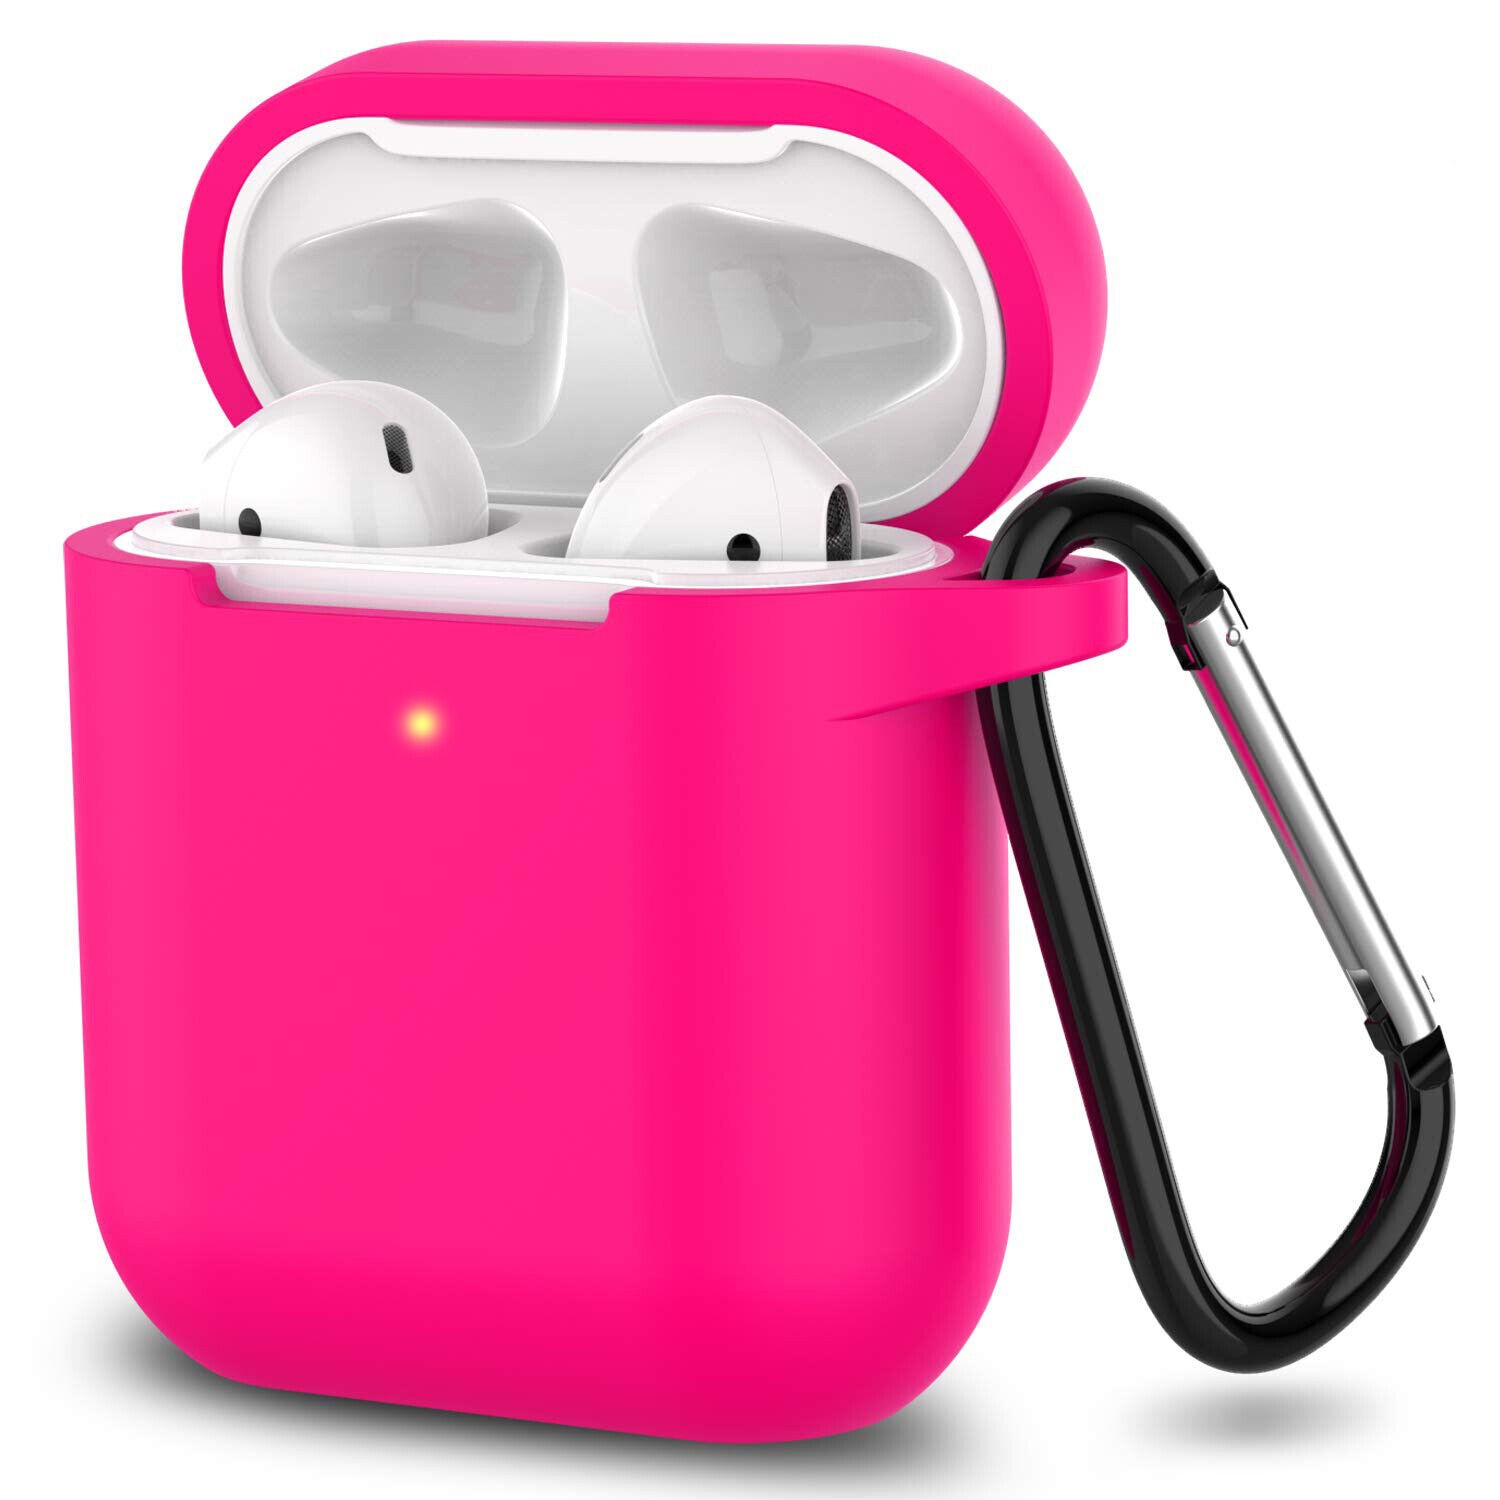 Premium Soft Silicone Skin Shockproof Protective Cover with KEYCHAIN for Airpod 2 / 1 (Hot Pink)